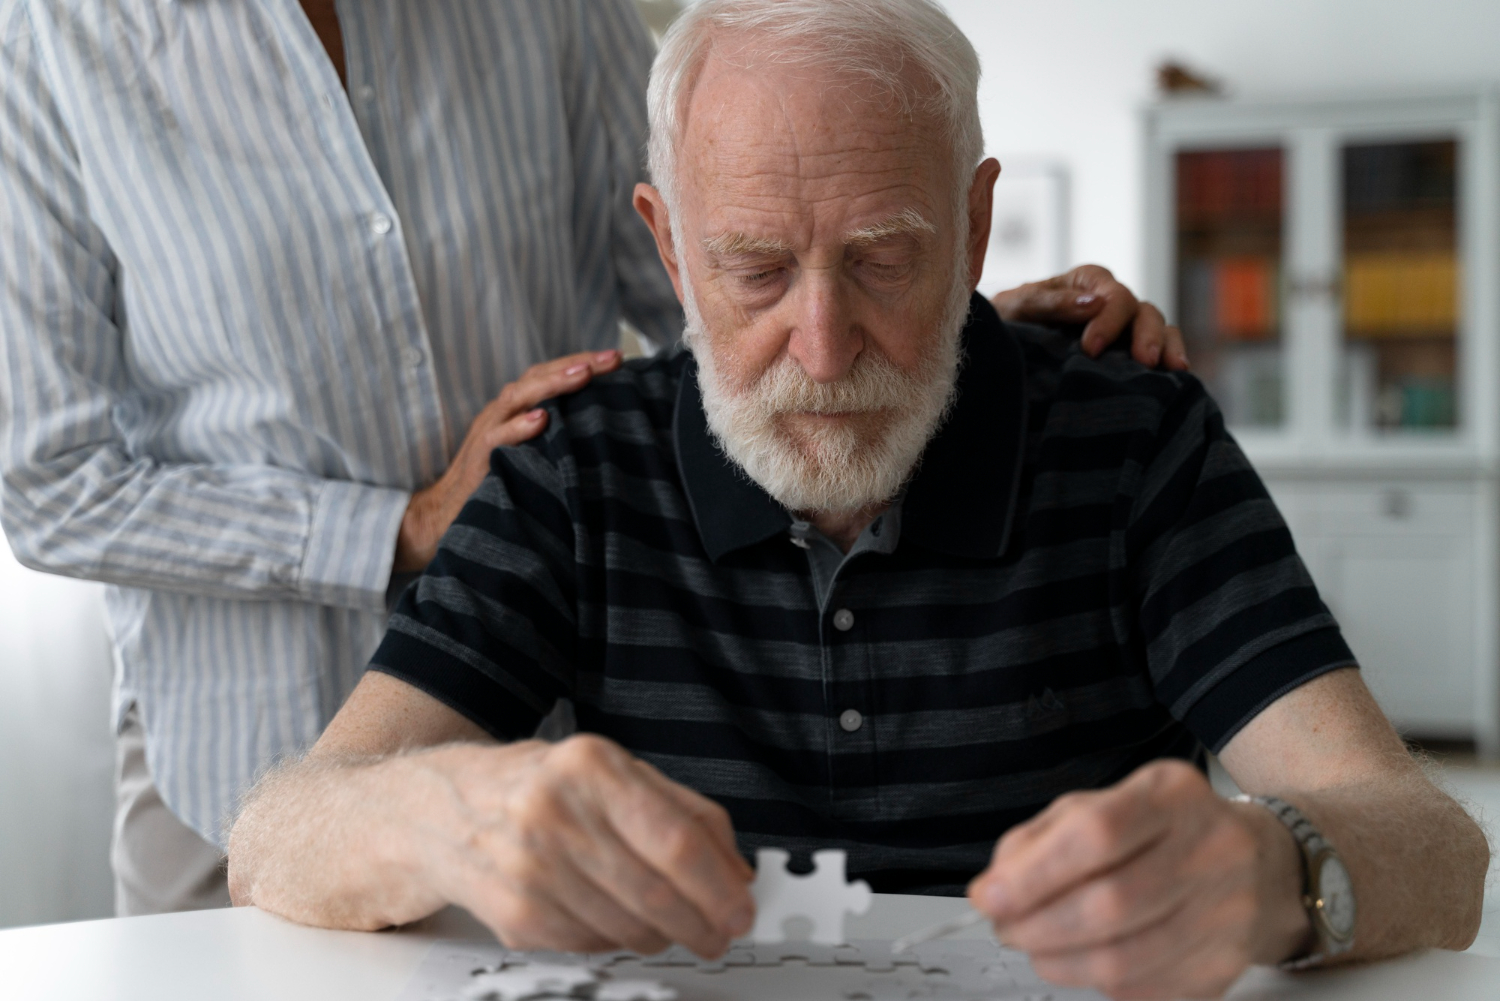 A gentleman dealing with dementia working on a puzzle, with the hands of his wife on his back supporting him